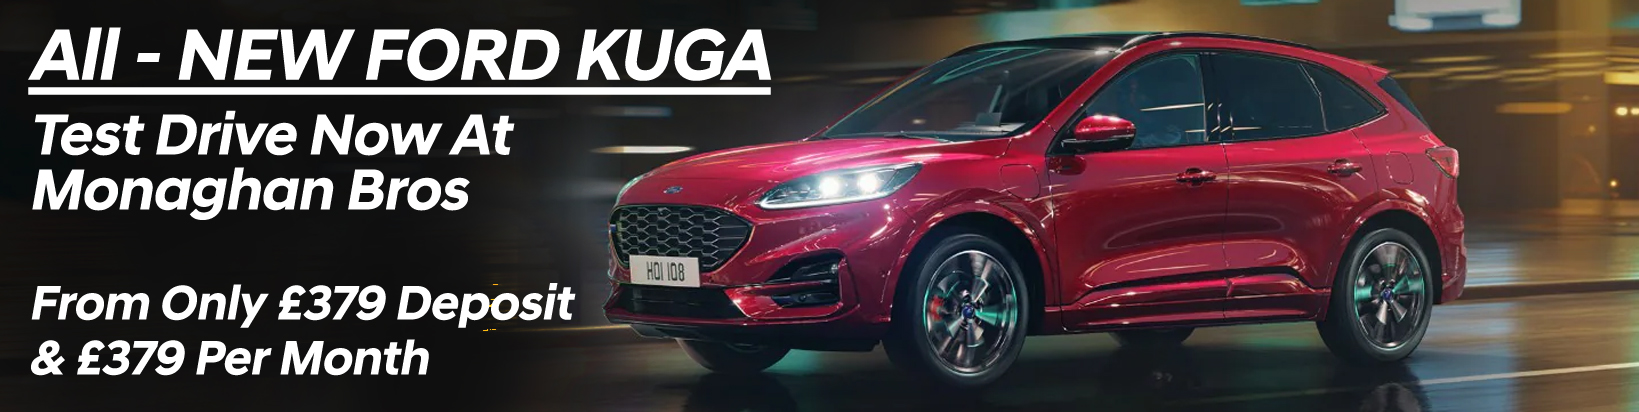 Kuga ST Line 1.5 TDCI 120PS (While Stock Lasts)